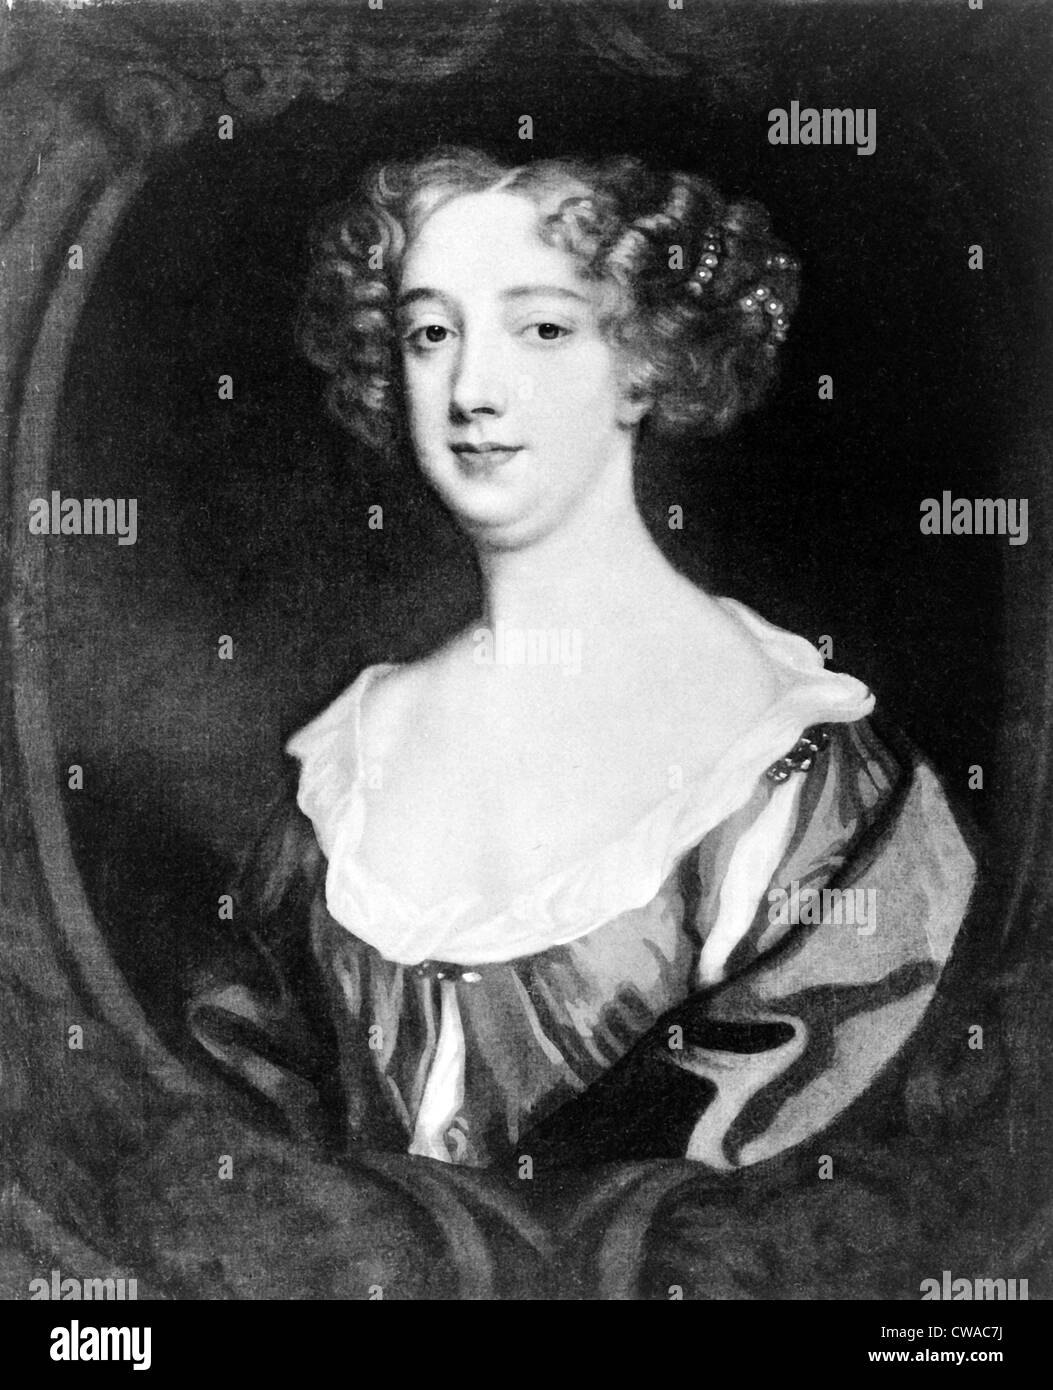 Aphra Behn (1640-1689), English novelist, playwright, and poet, the first known professional English female writer. Stock Photo